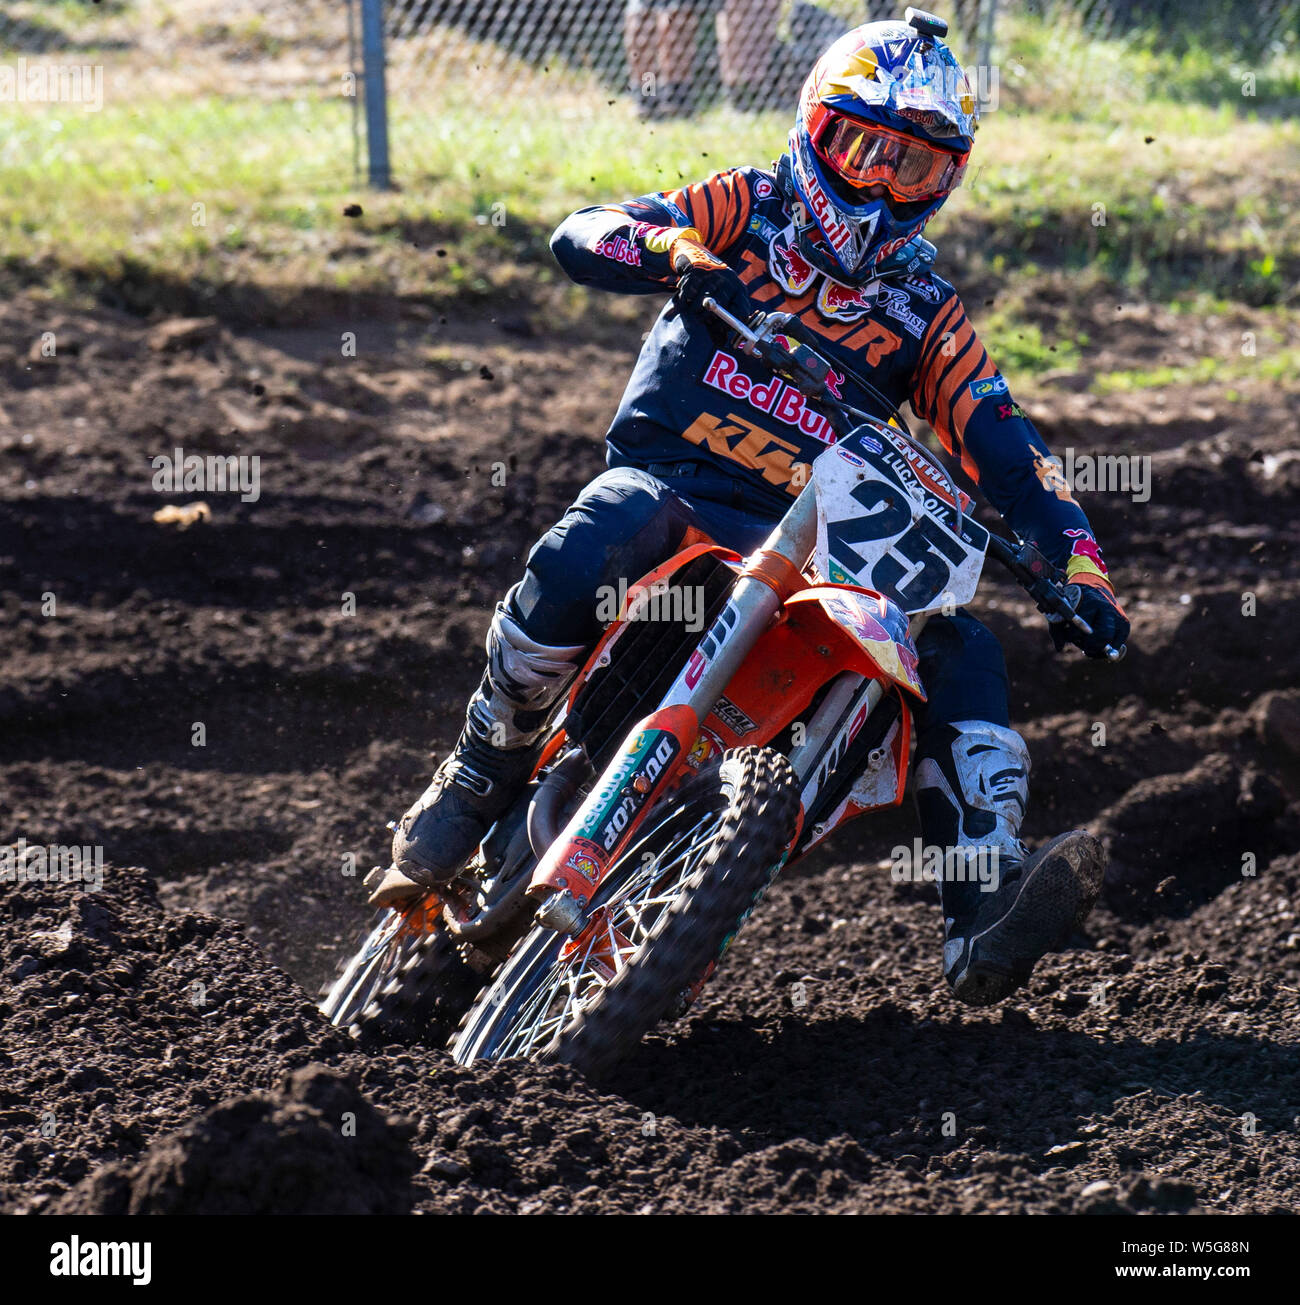 Washougal, WA USA. 27th July, 2019. # 25 Marvin Musqin coming out of section 31 section during the Lucas Oil Pro Motocross Washougal National 450 class championship at Washougal MX park Washougal, WA Thurman James/CSM/Alamy Live News Stock Photo